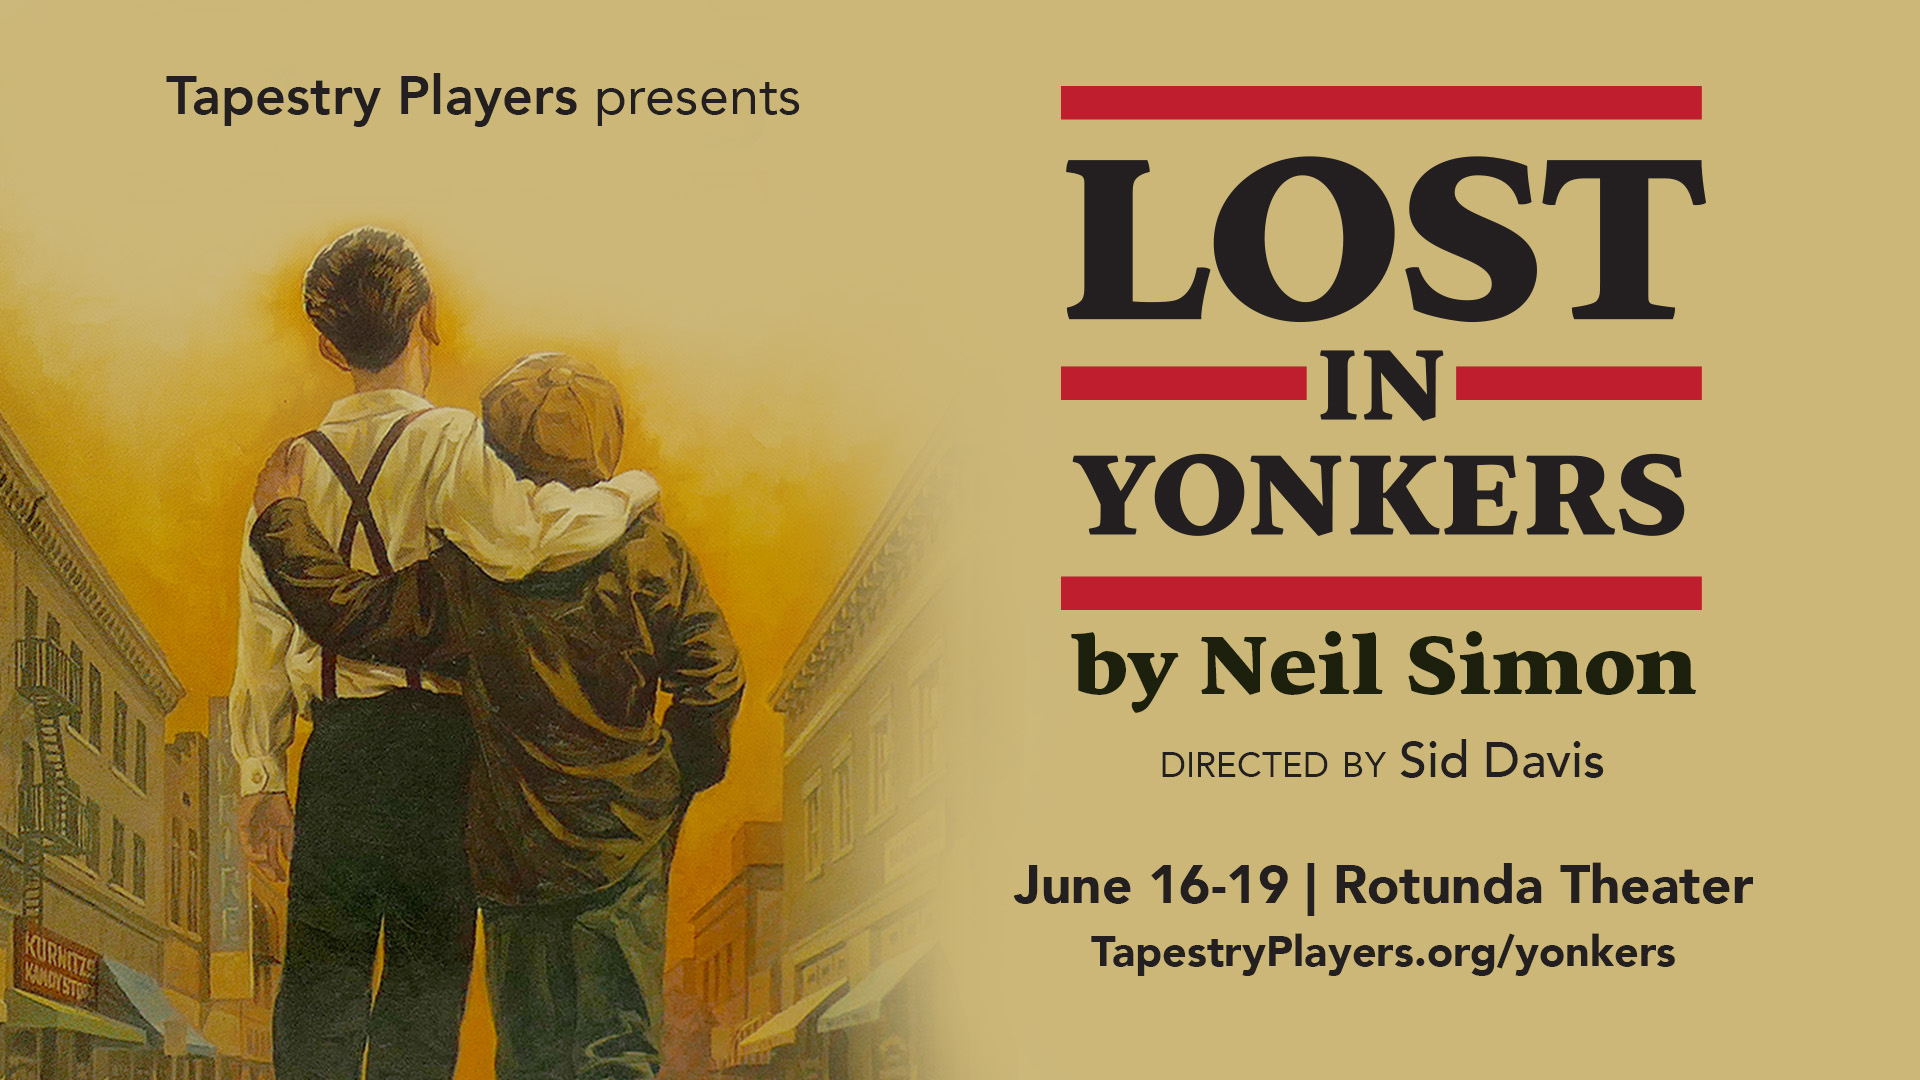 Tapestry Players presents Lost in Yonkers